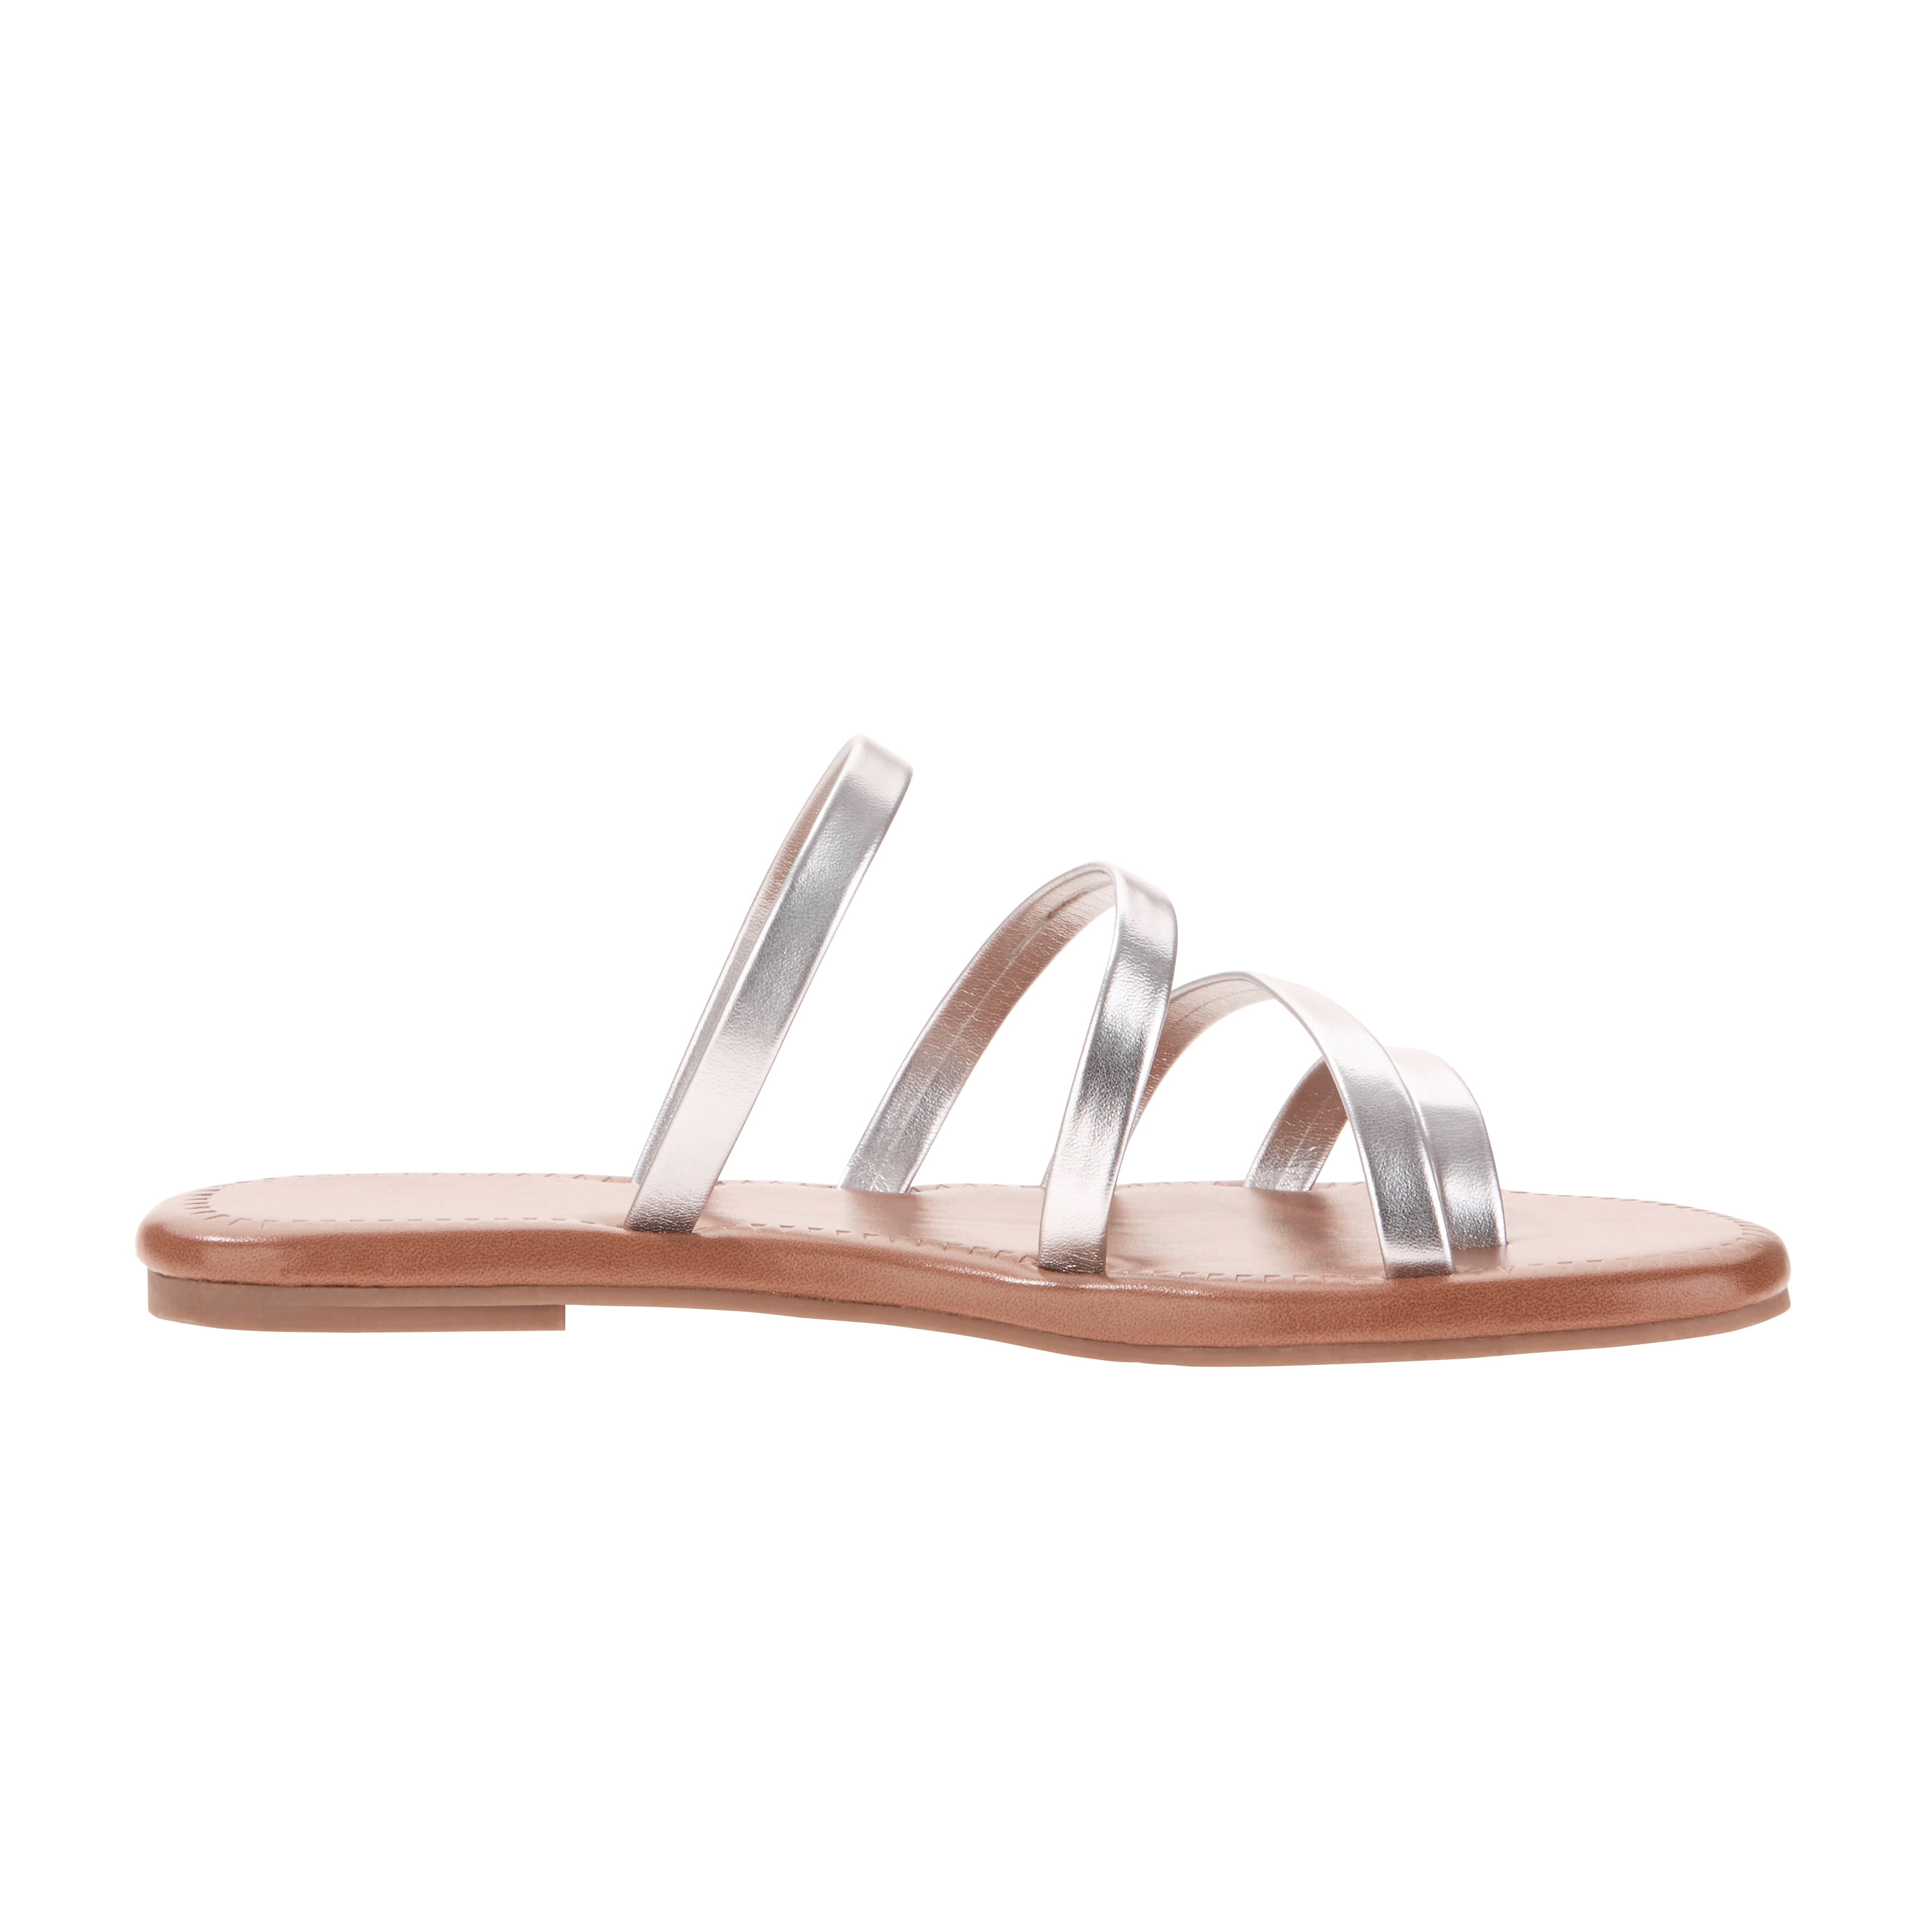 Time and Tru - Time and Tru Women's Strappy Slide Sandal - Walmart.com ...